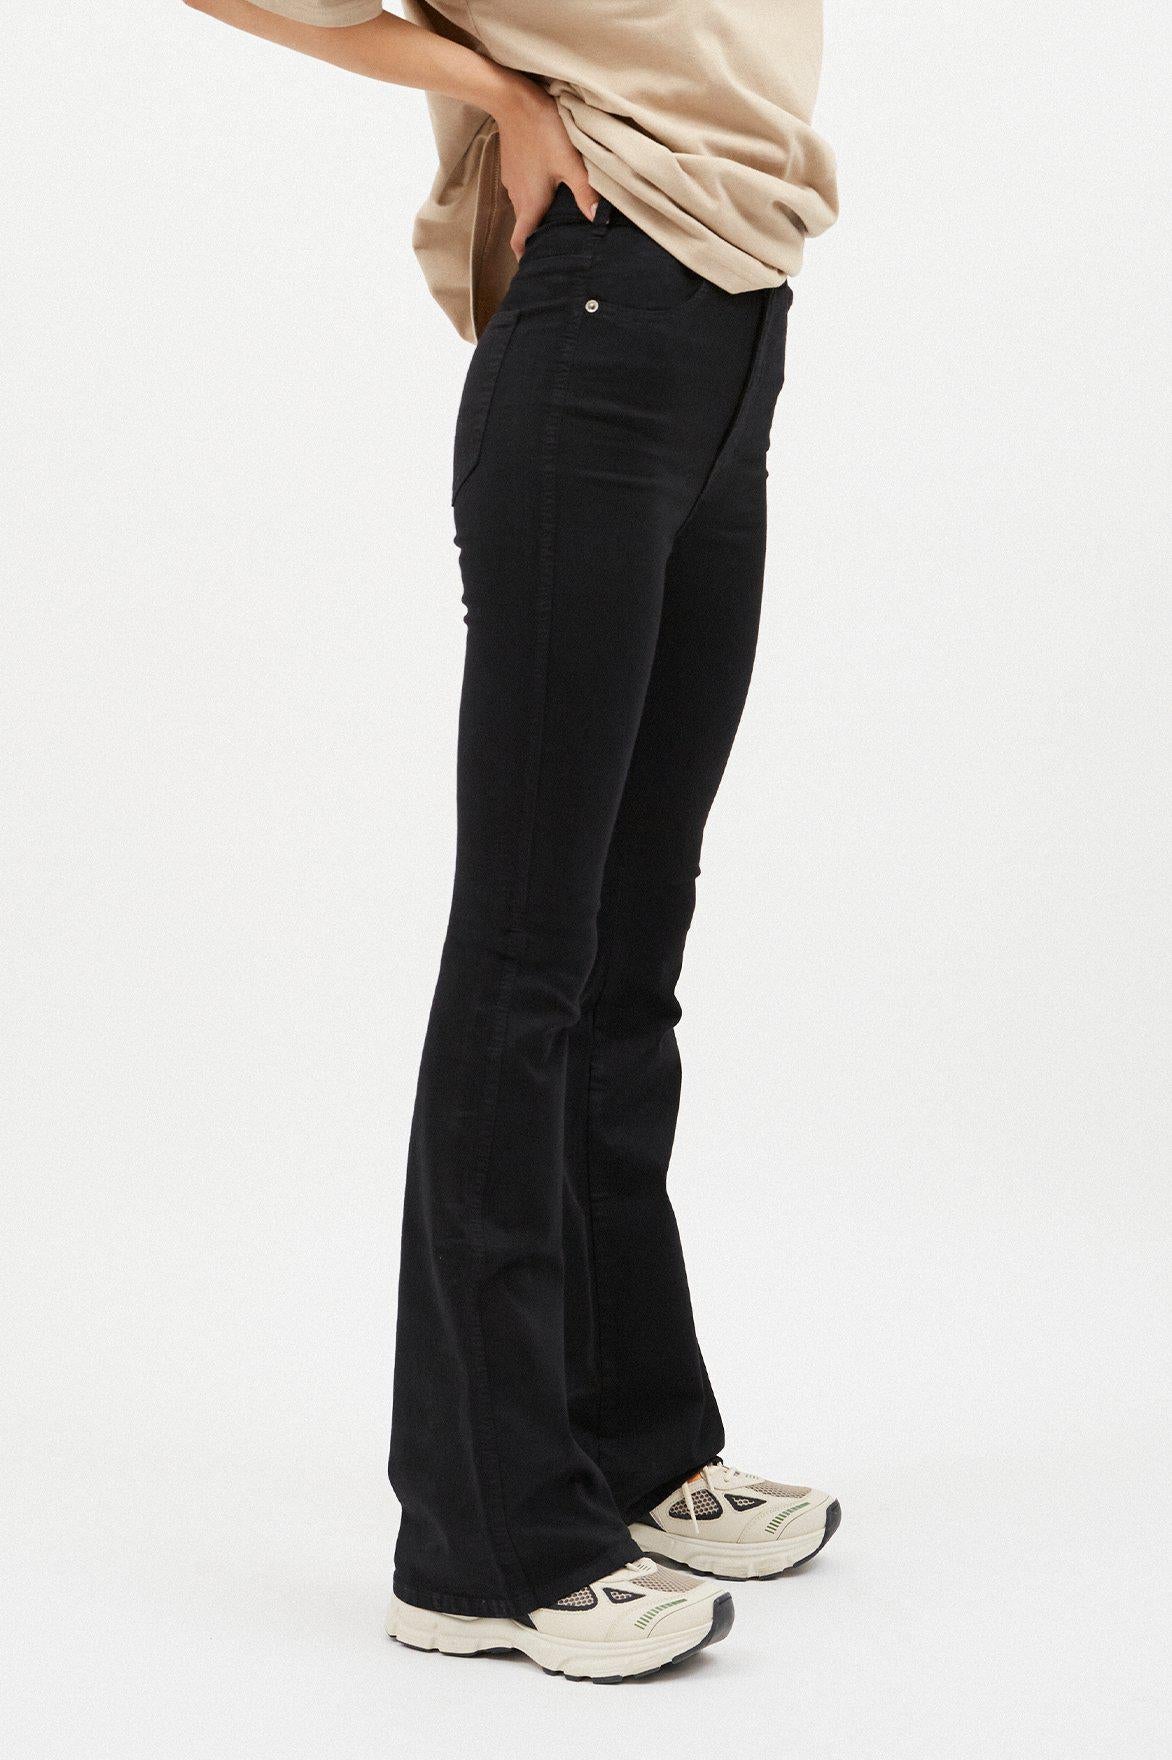 Circyy High Waisted Jeans Women Vintage Black Grey Flare Pants